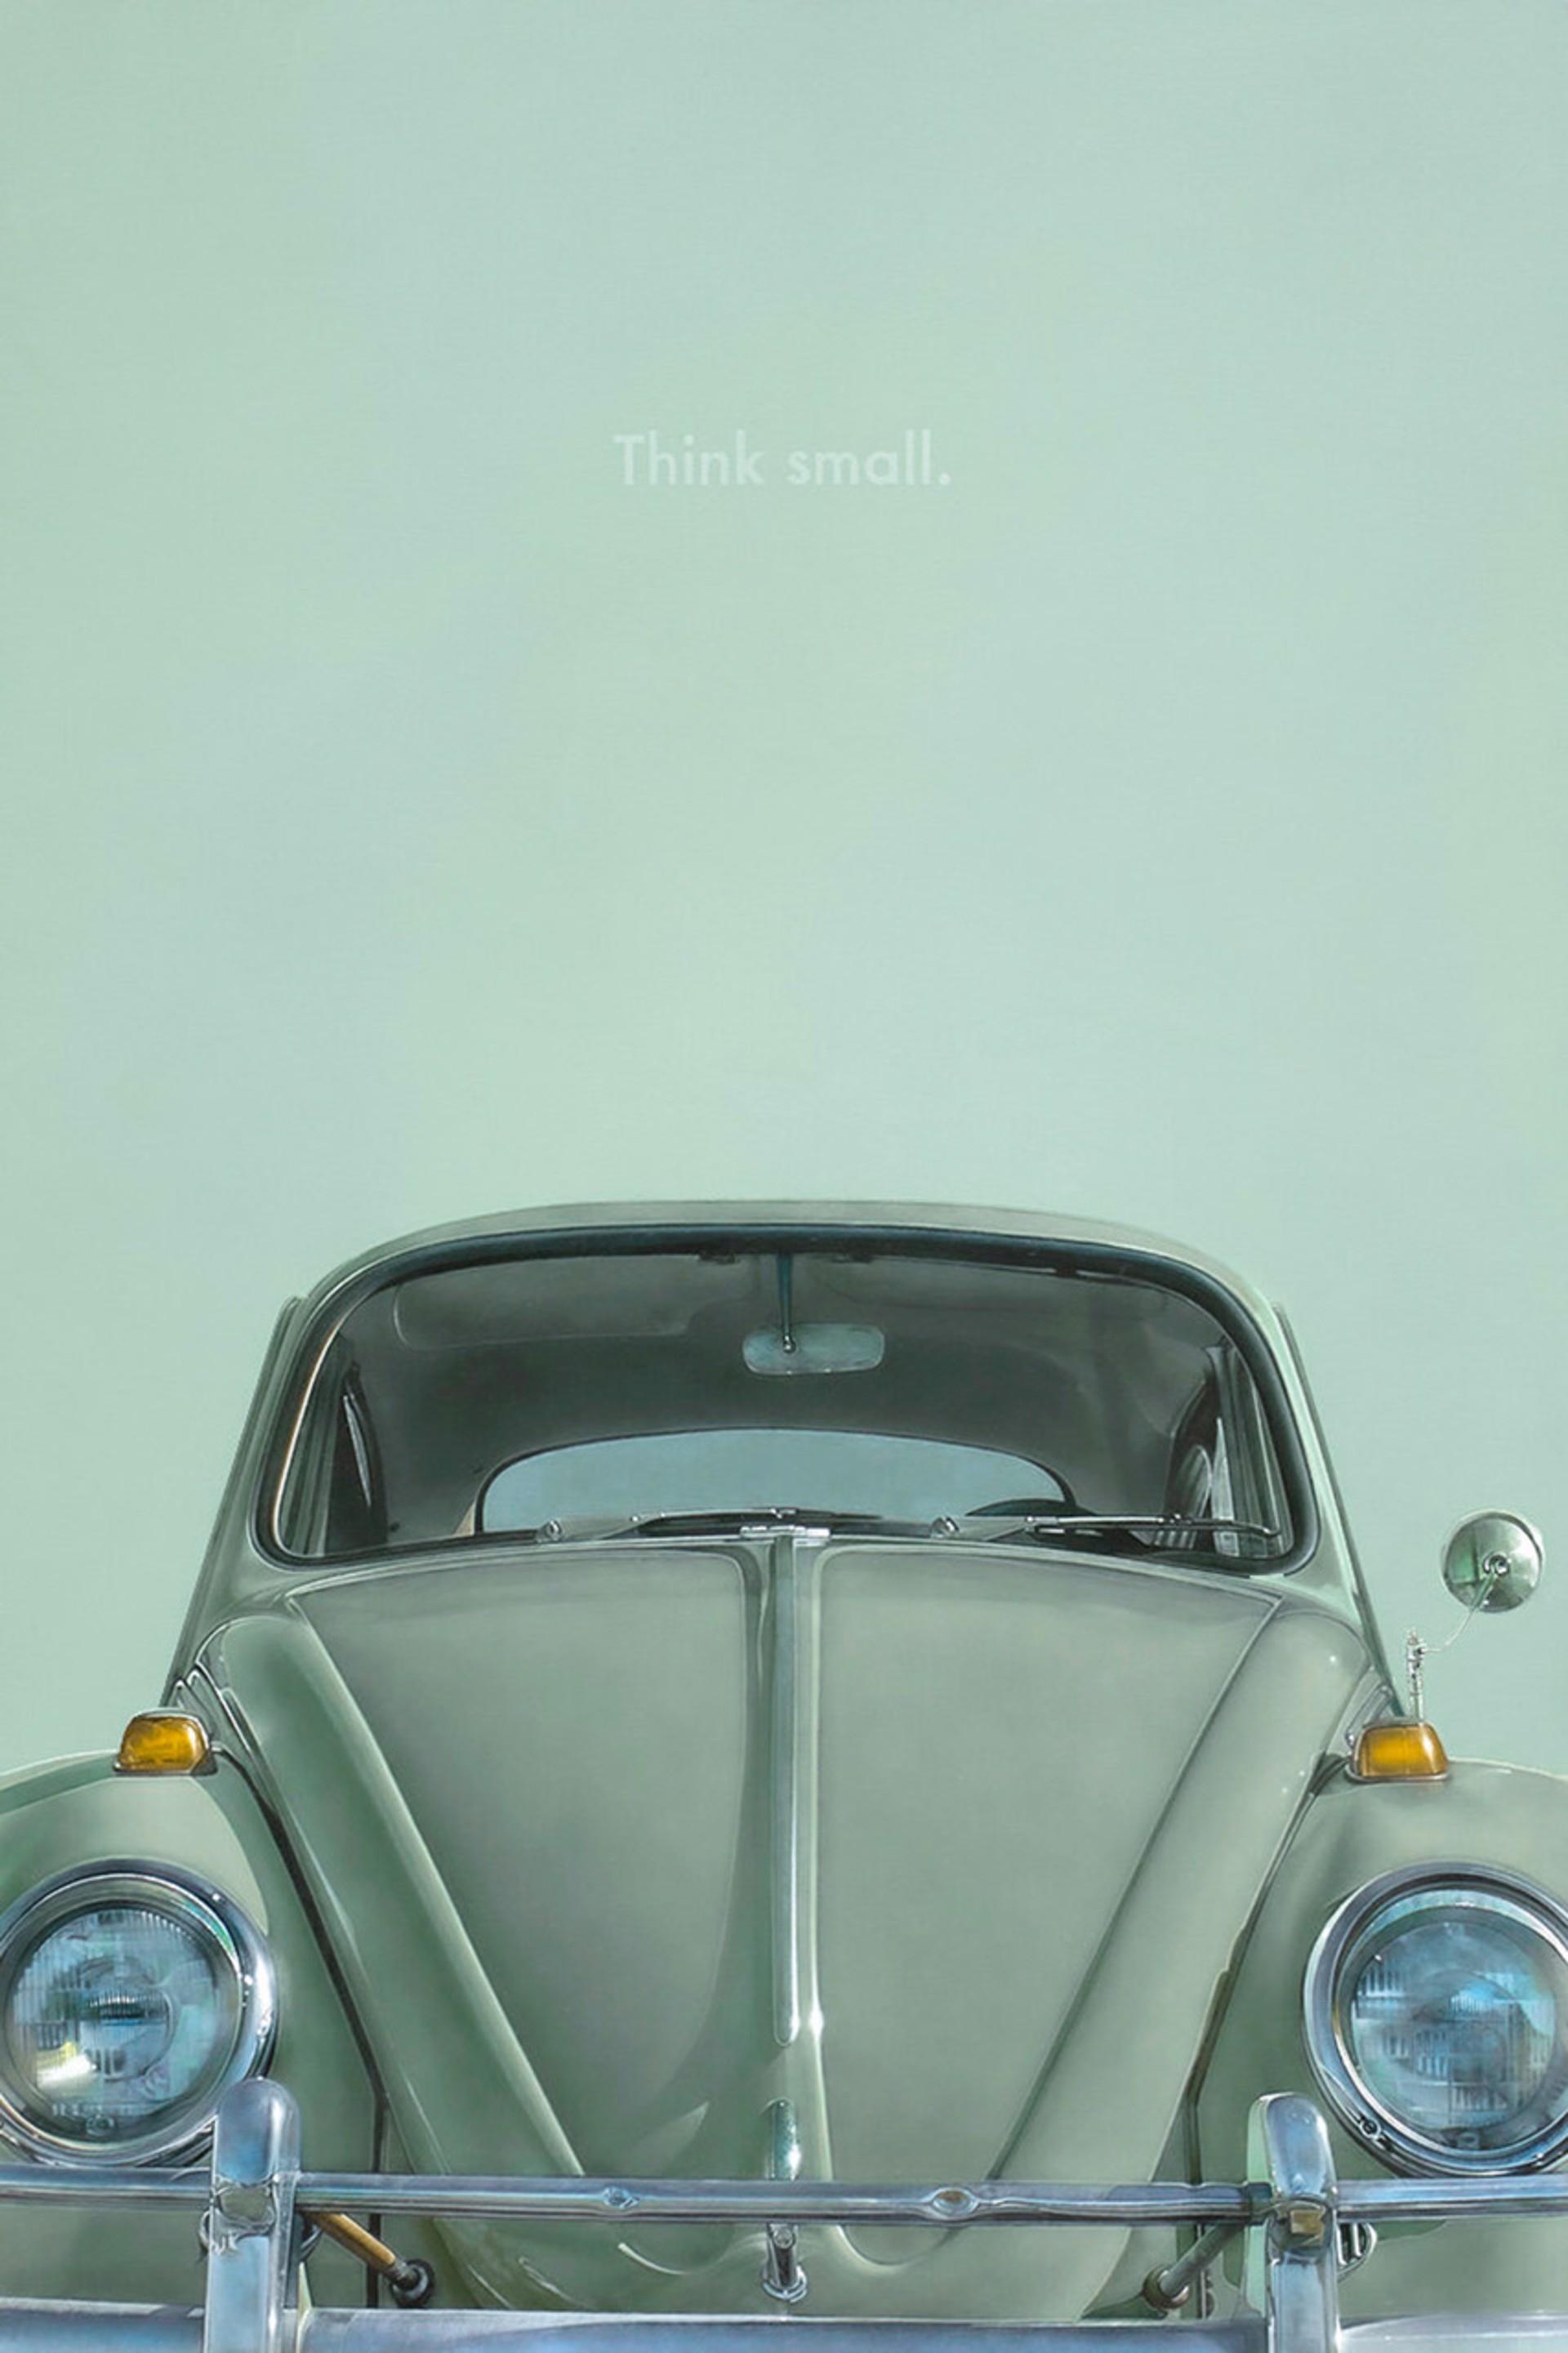 Think Small No.2 by James Hollingsworth